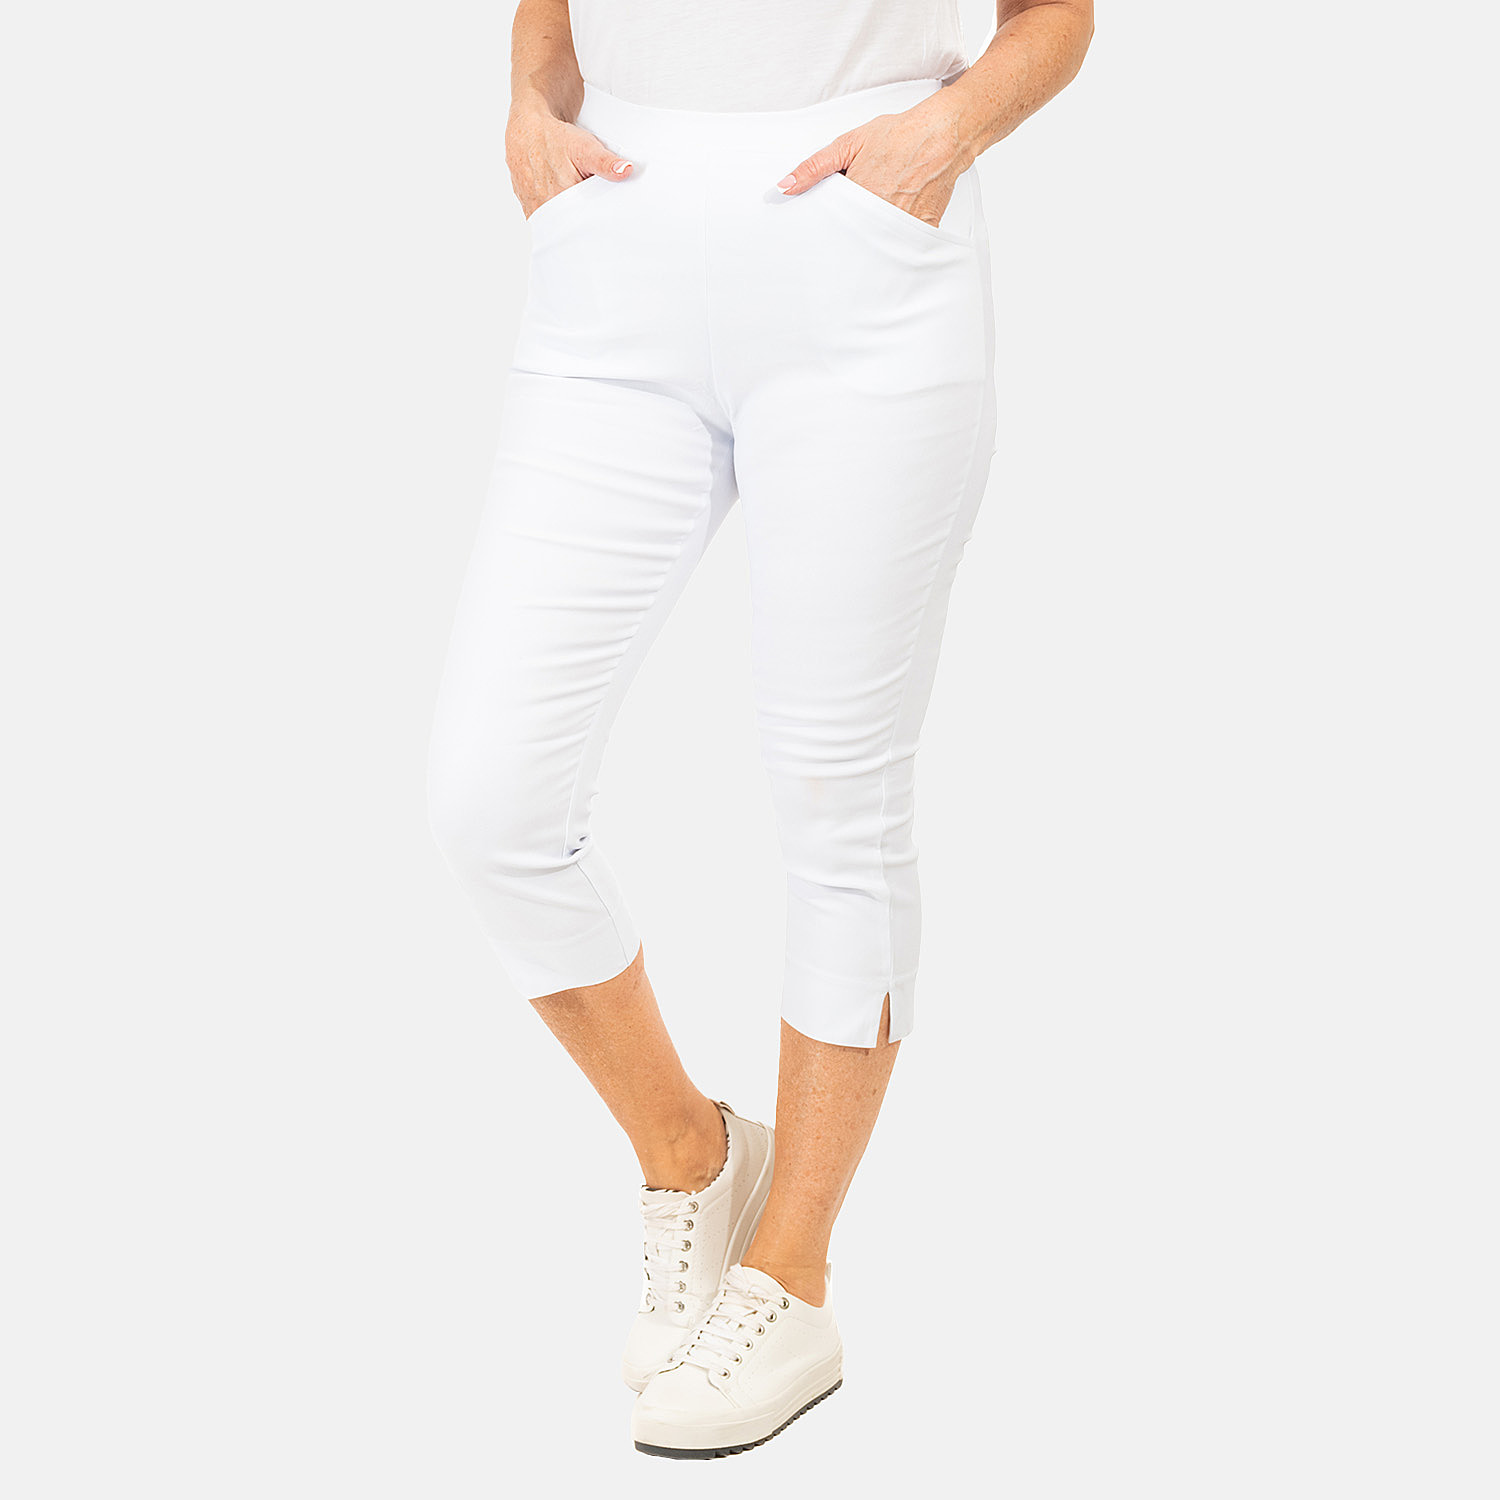 Viscose-Jean-and-Pant-Trouser-Size-1x1-cm-White